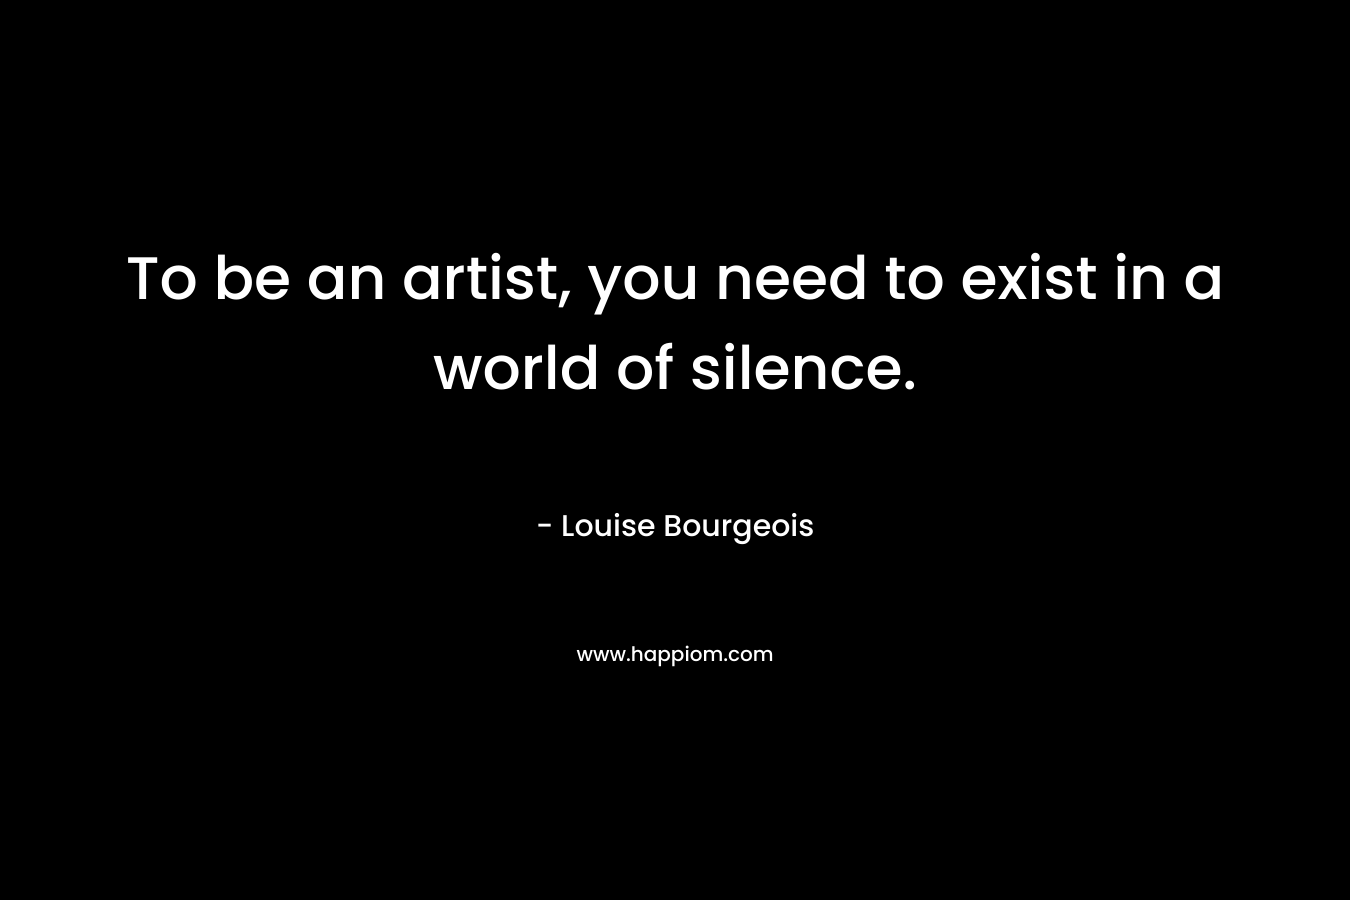 To be an artist, you need to exist in a world of silence. – Louise Bourgeois